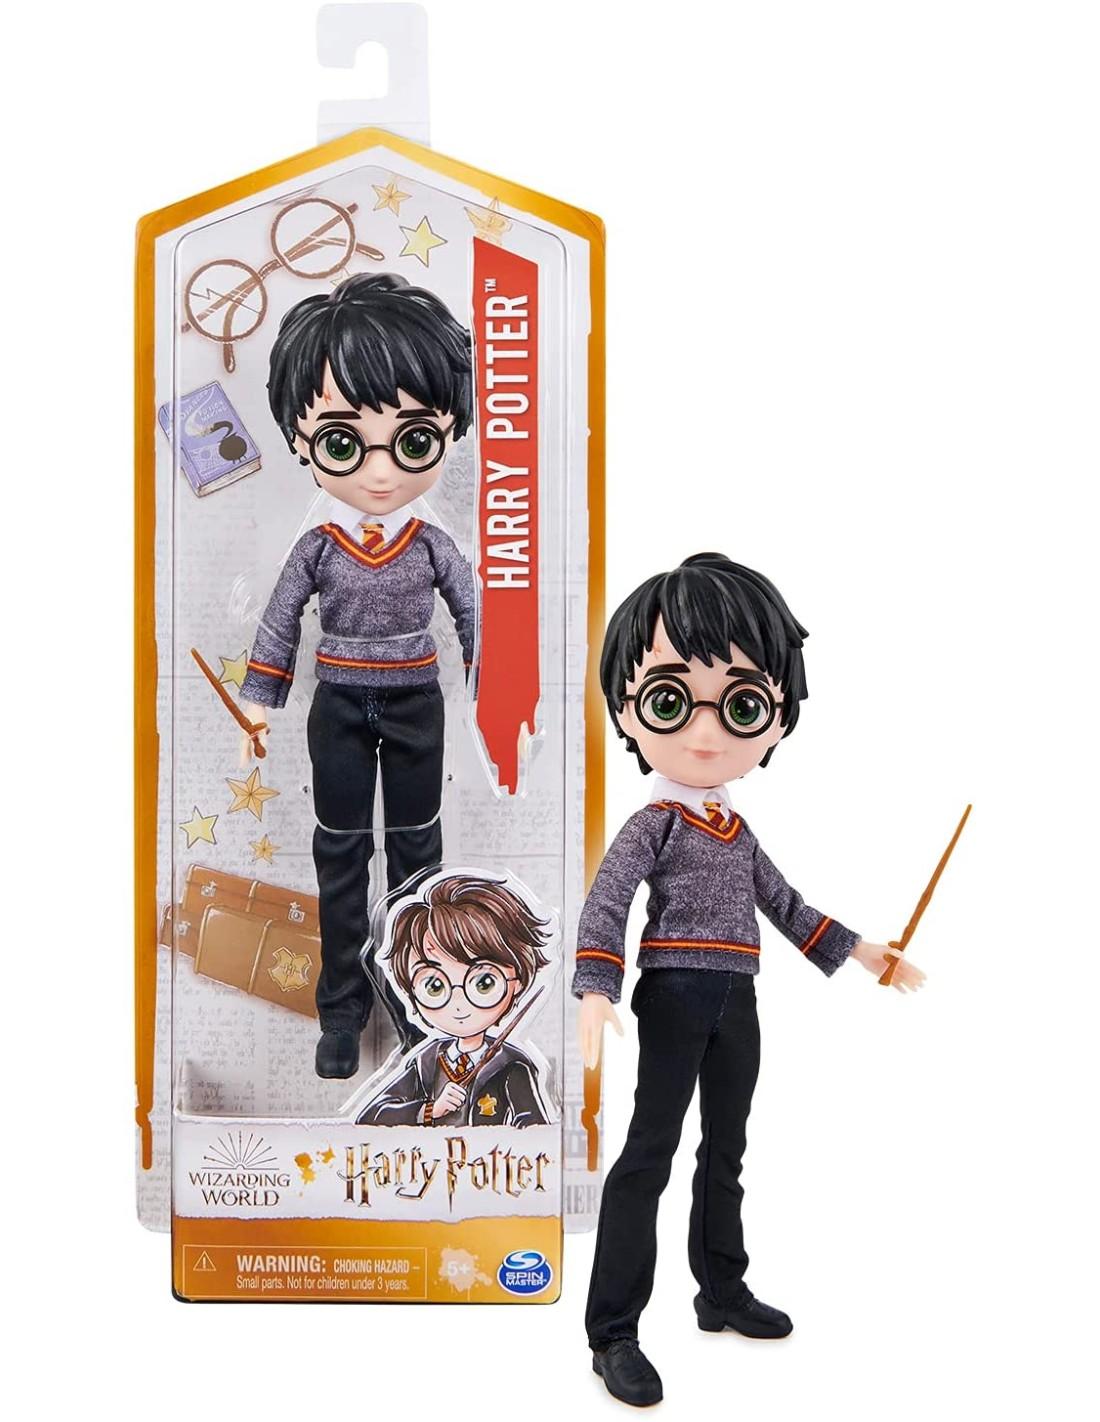 Selected image for SPIN MASTER Figura Harry Potter